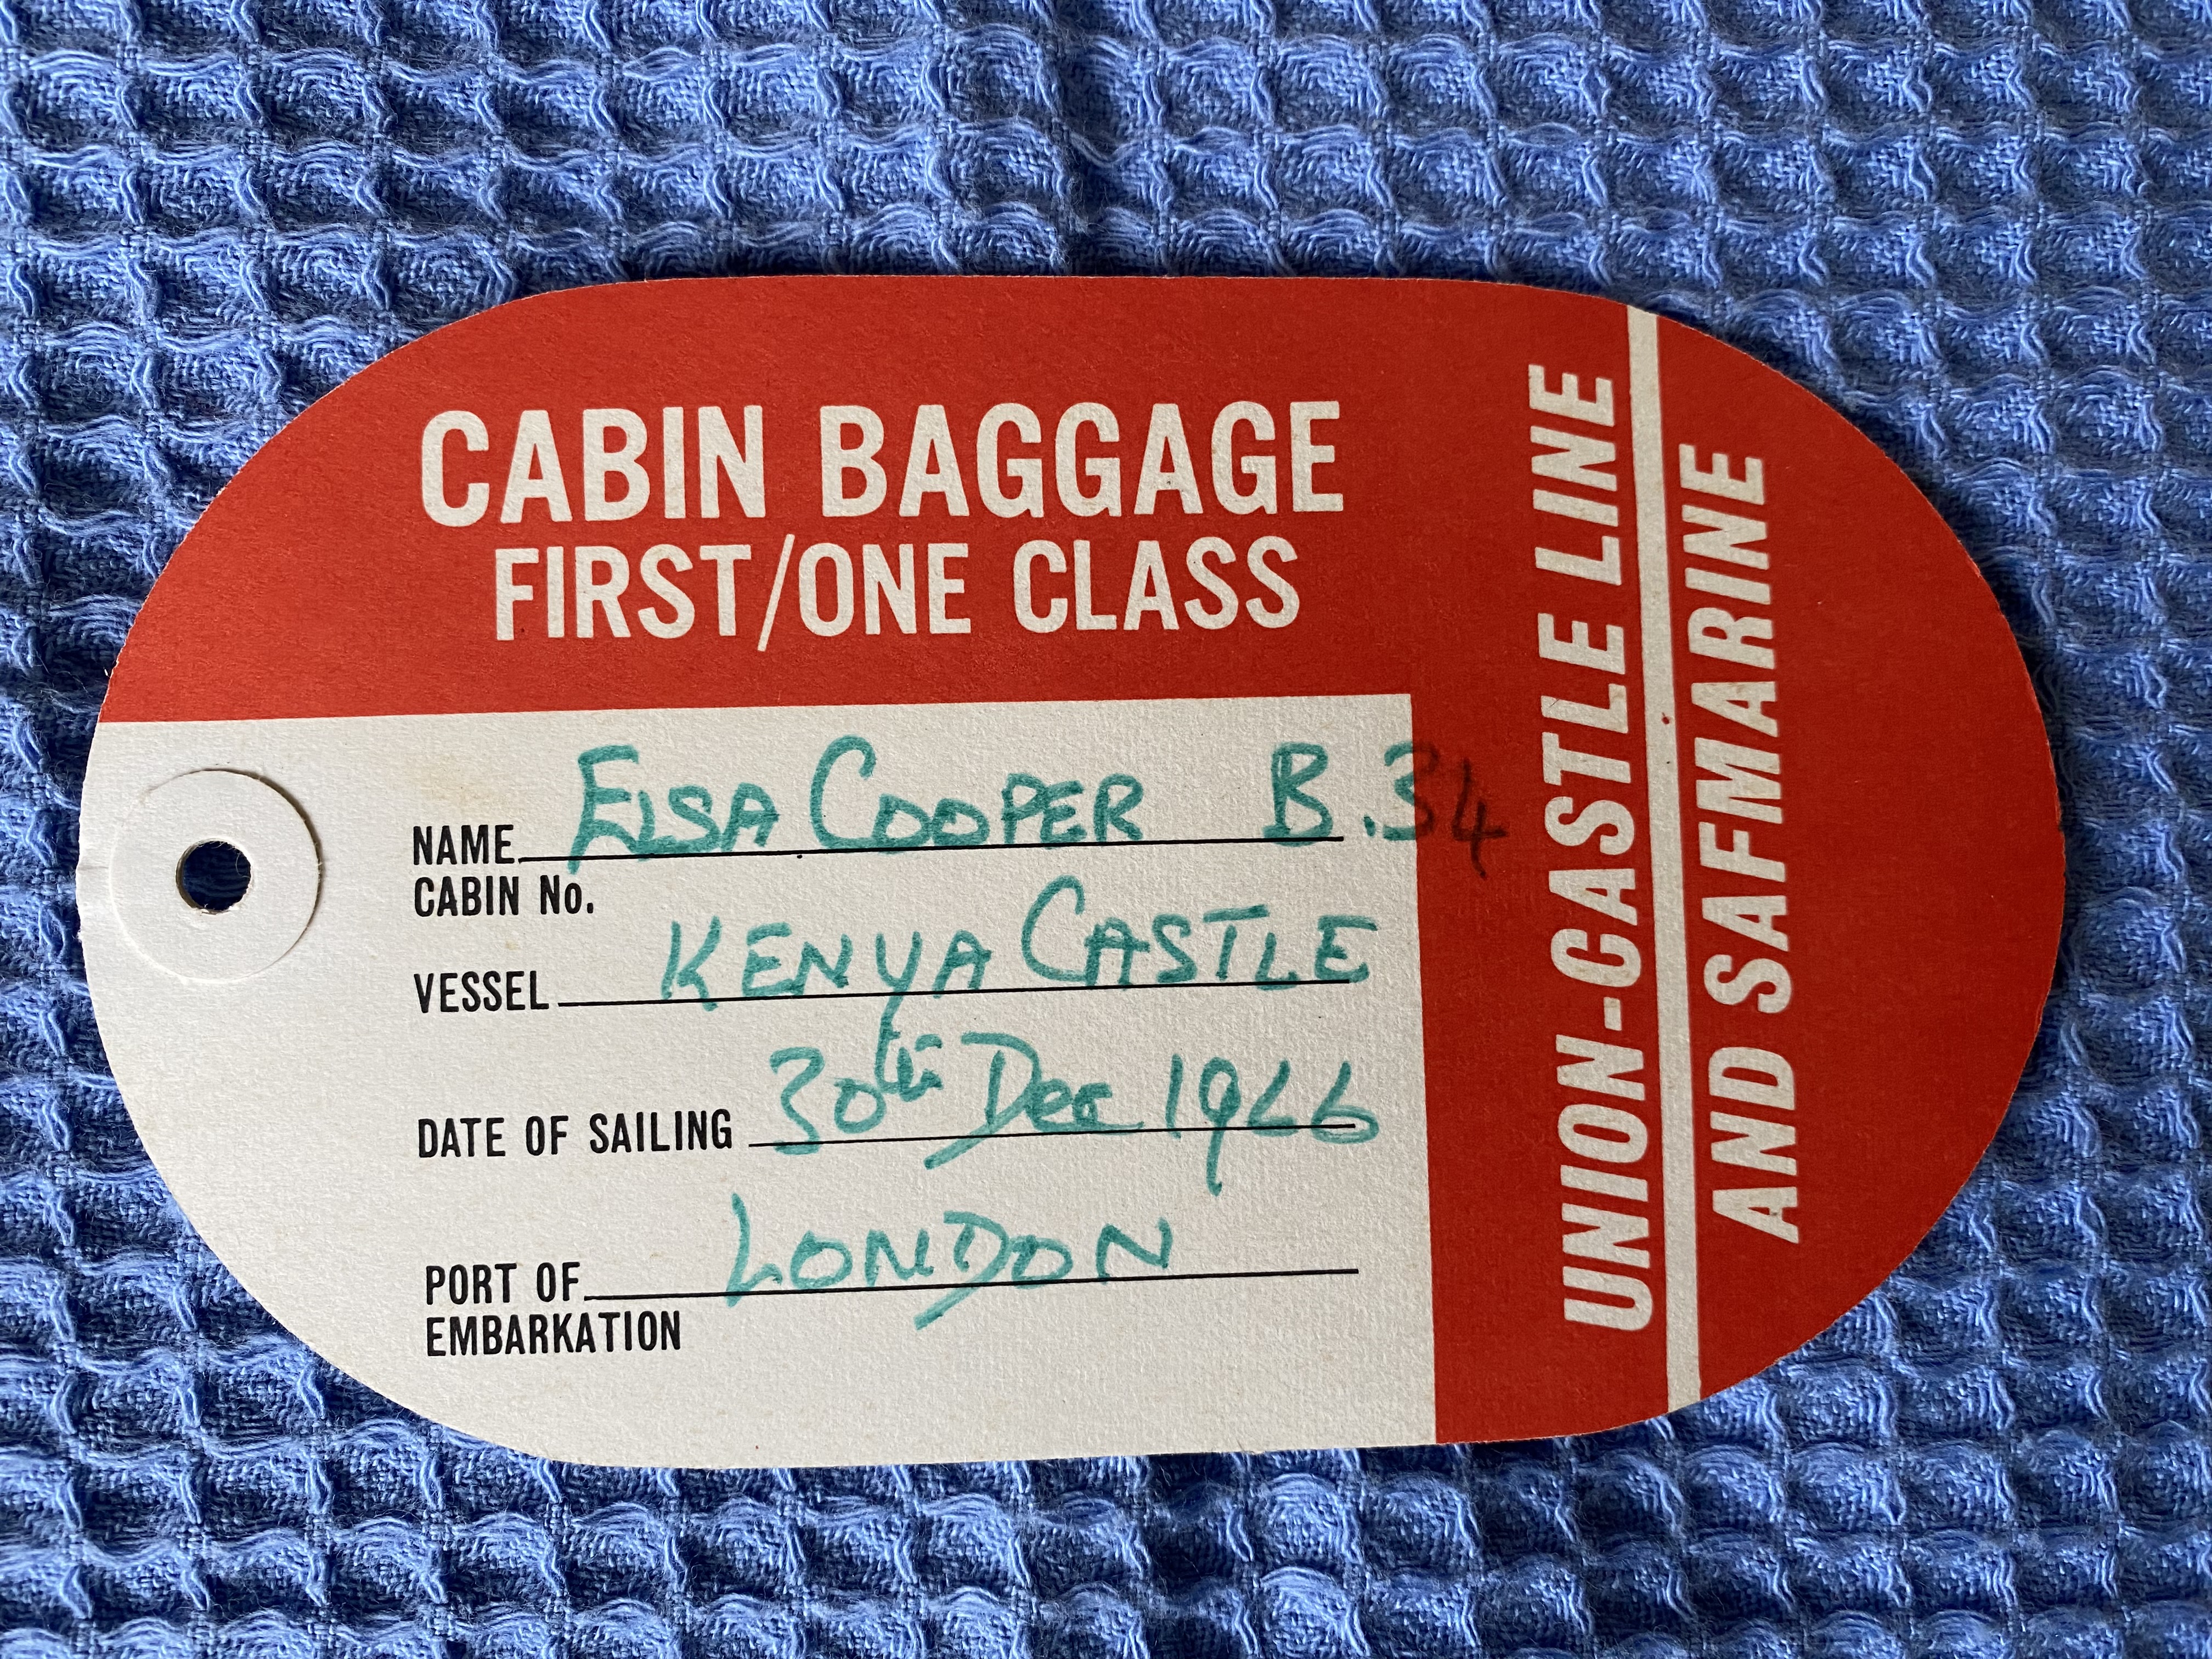 UNION CASTLE LINE AS USED LUGGAGE LABEL FROM THE VESSEL THE KENYA CASTLE